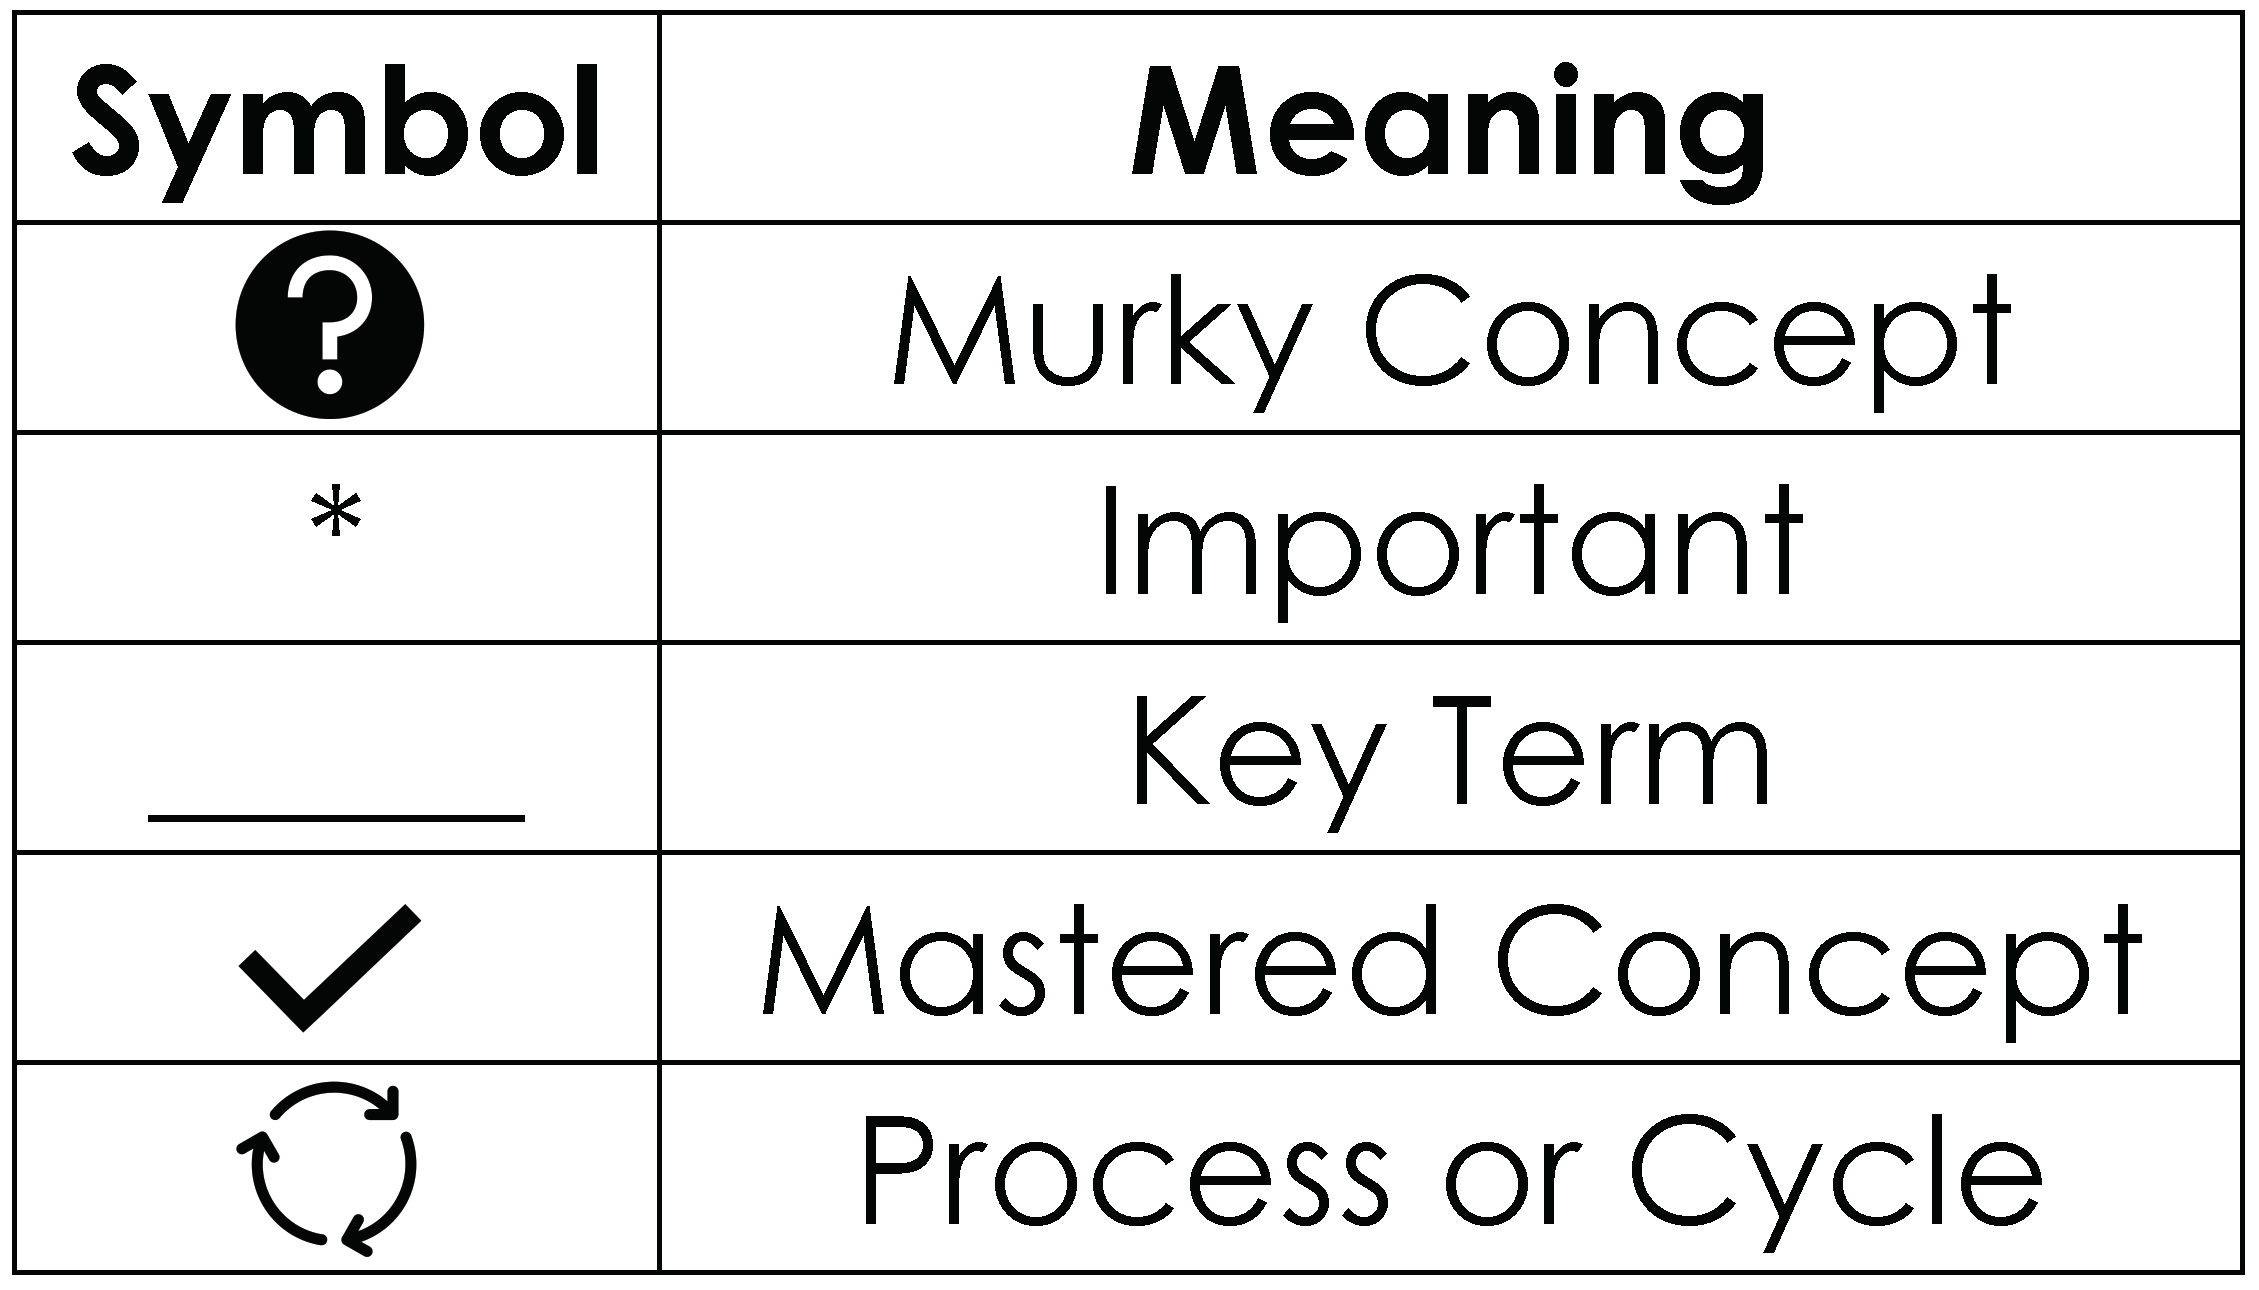 Metacognitive markers: question mark is murky concept, asterisk is important, etc